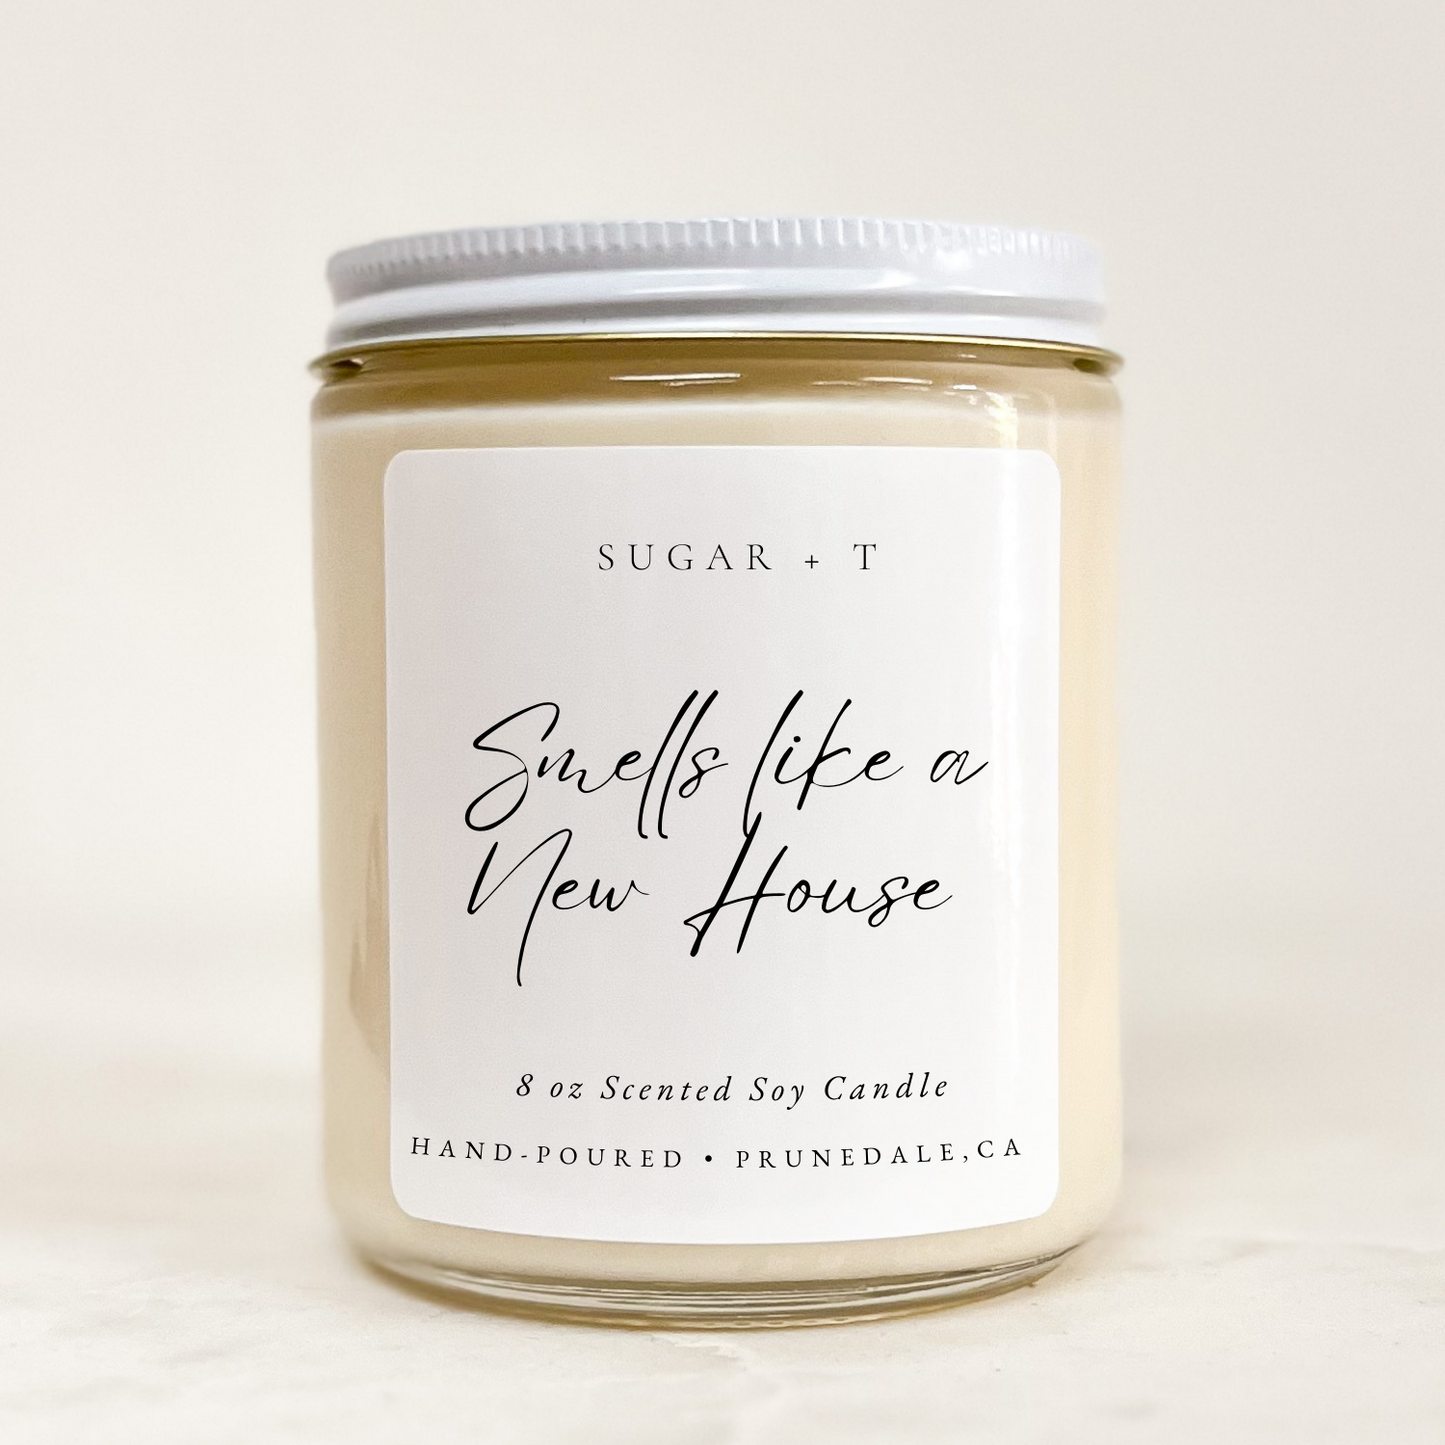 “Smells like New a House” Scented Candle